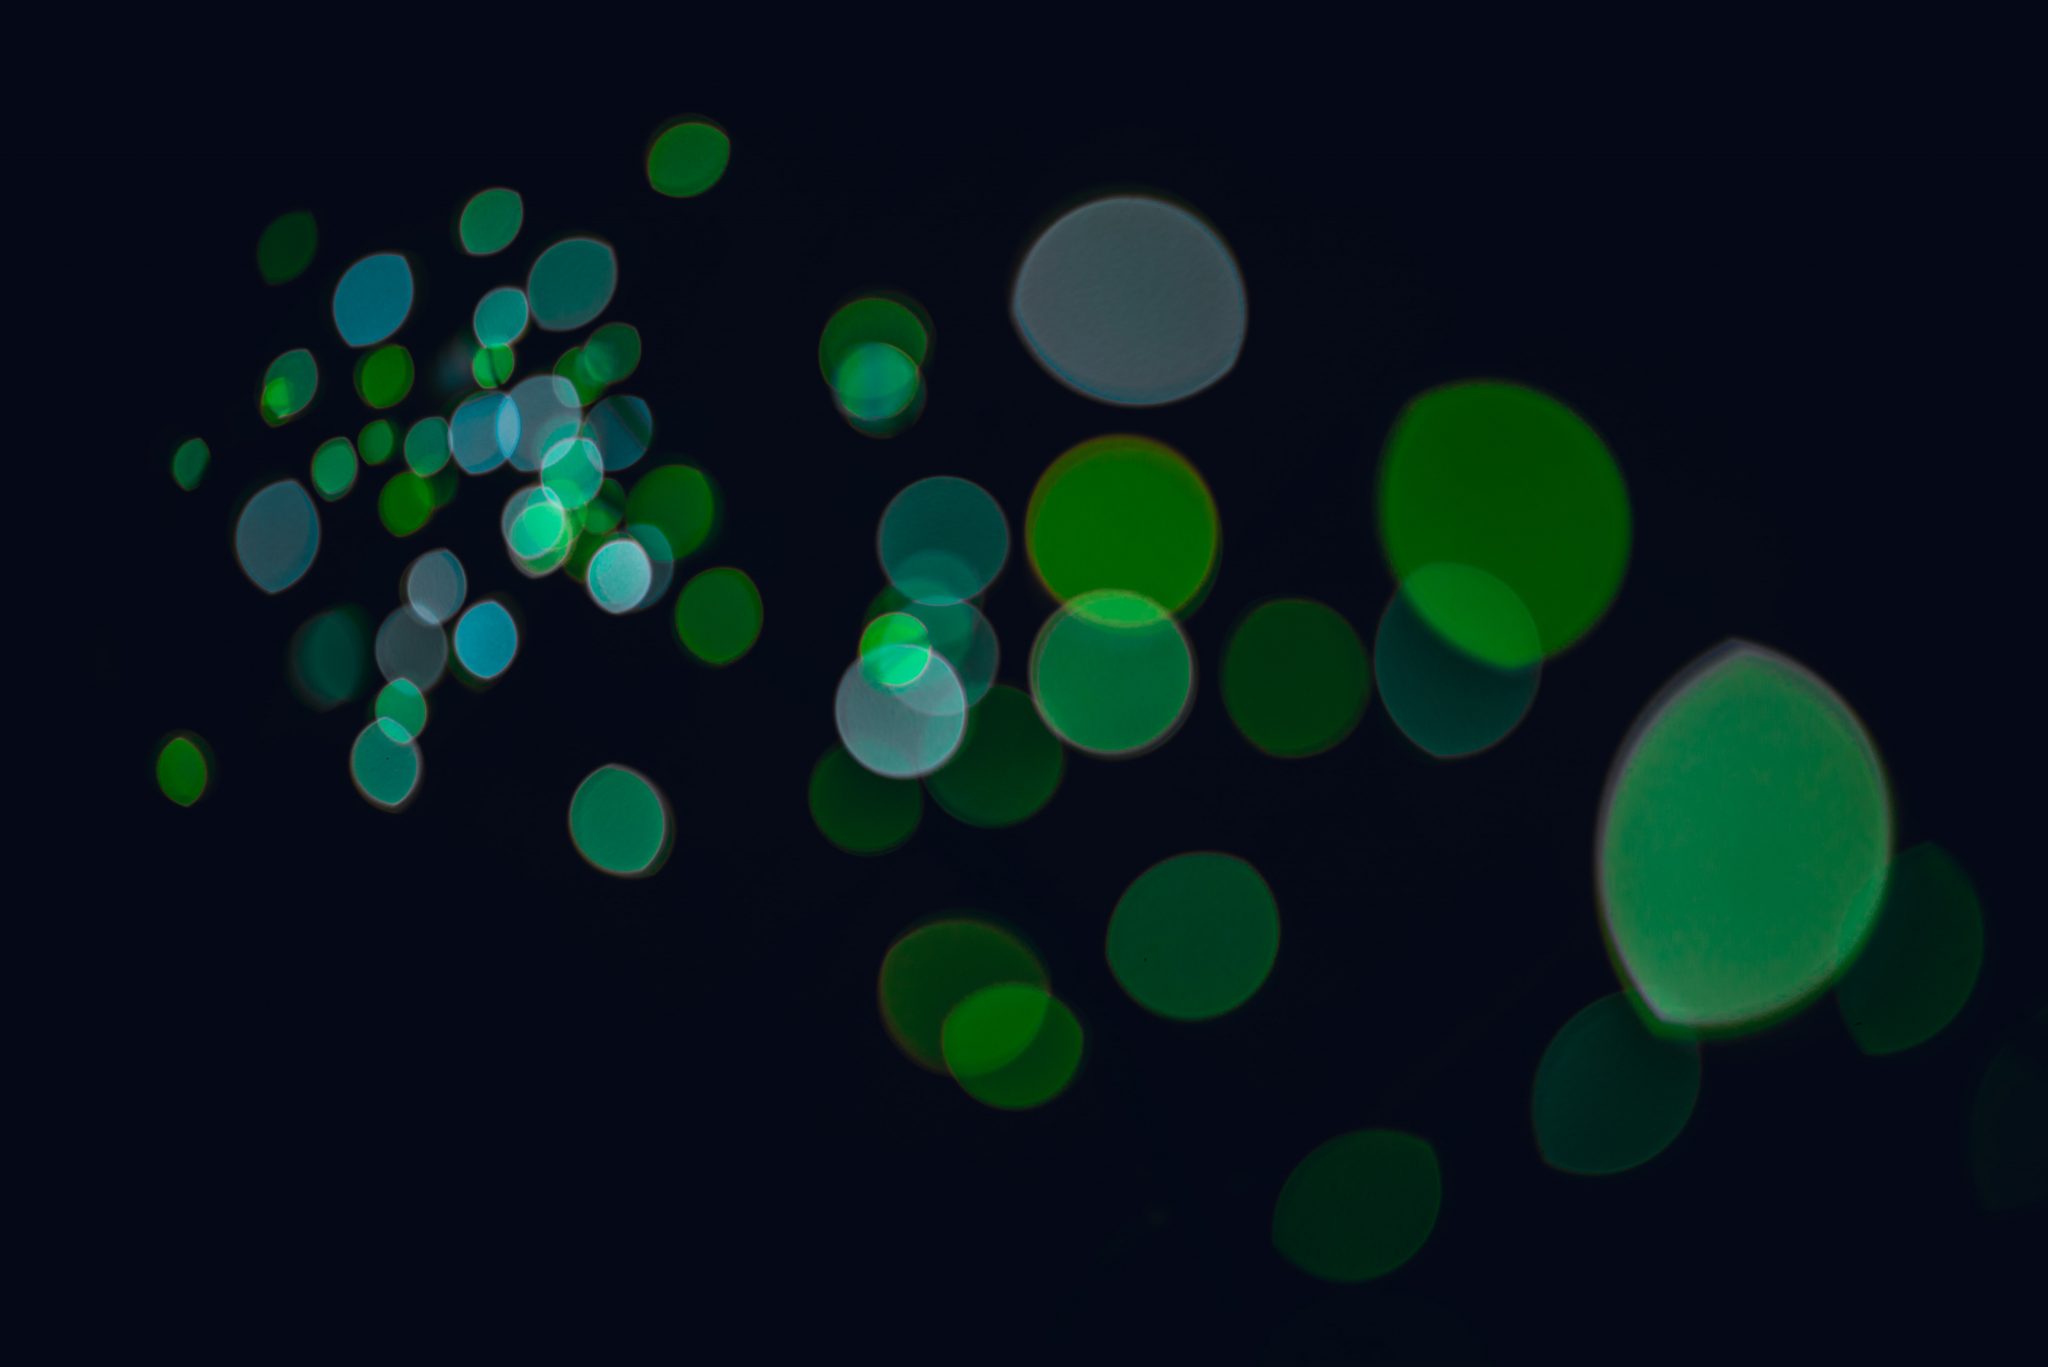 Abstract Green Image